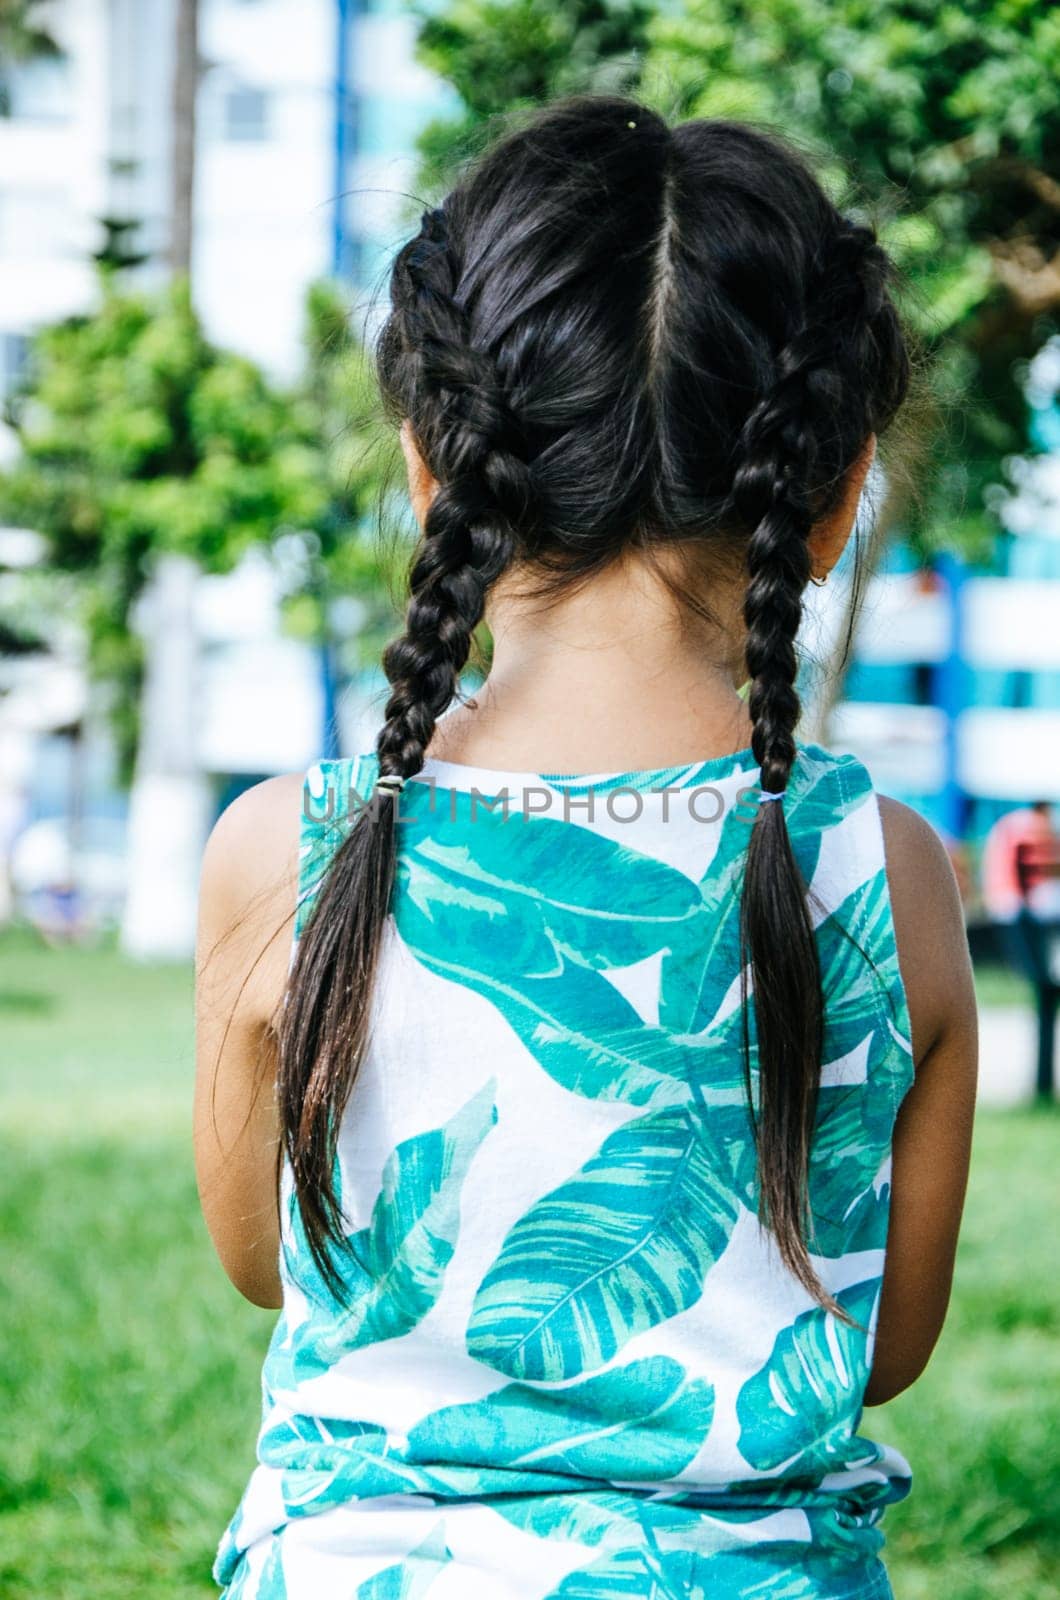 Little girl with braids on her back. Outdoors. Vertical format. by Peruphotoart